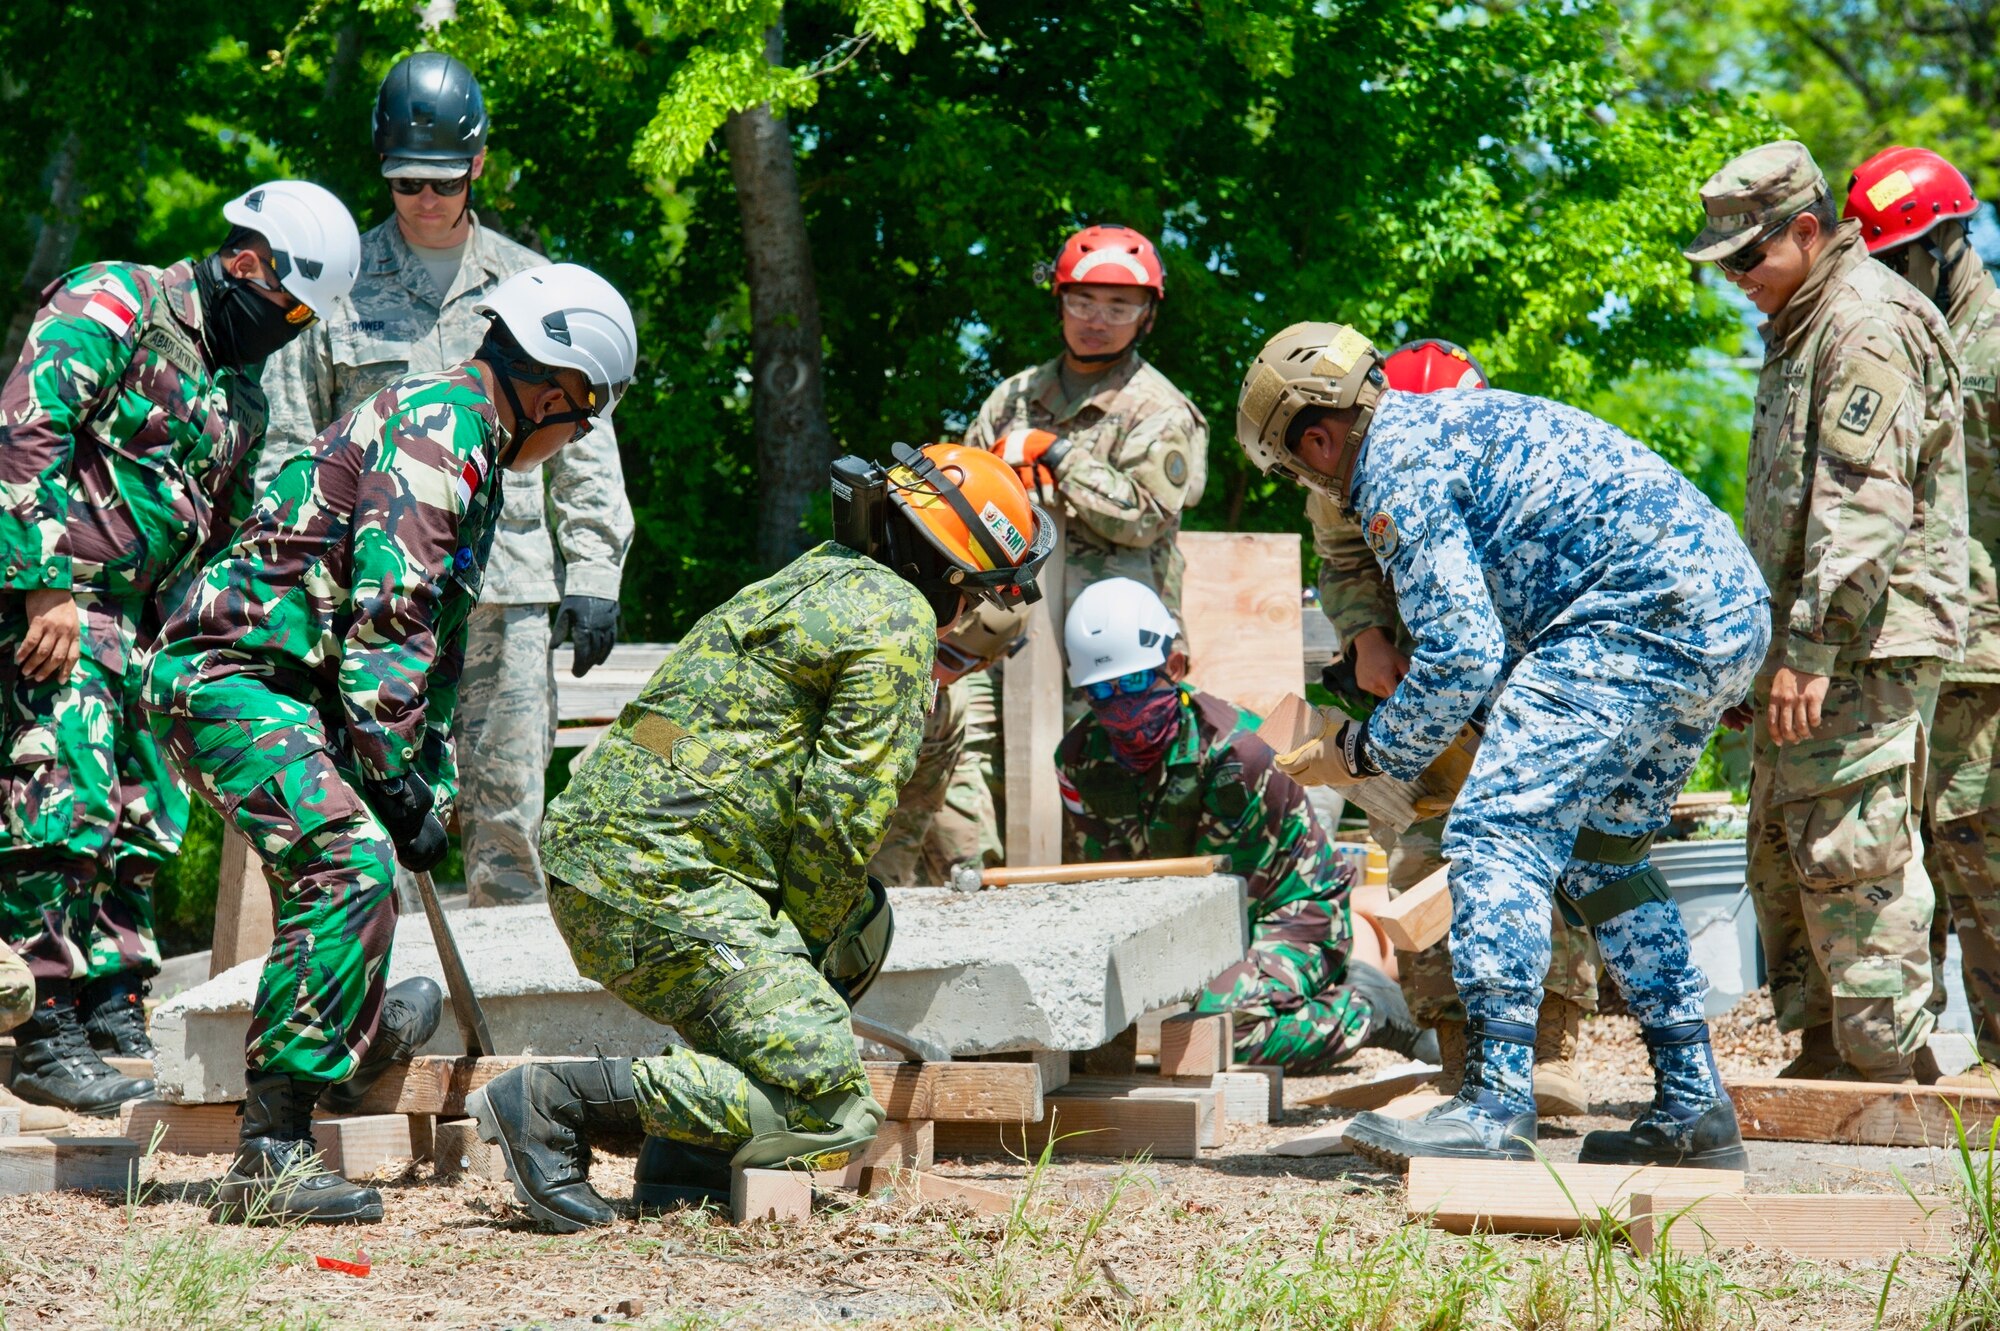 Service members from multiple nations lift up a large cement block during breaching and shoring training as part of the combined - Multinational Task Force [CTF 501] search and extraction training exercise on July 18, 2019 at Kalaeloa Urban Search and Rescue Training area, Hawaii.